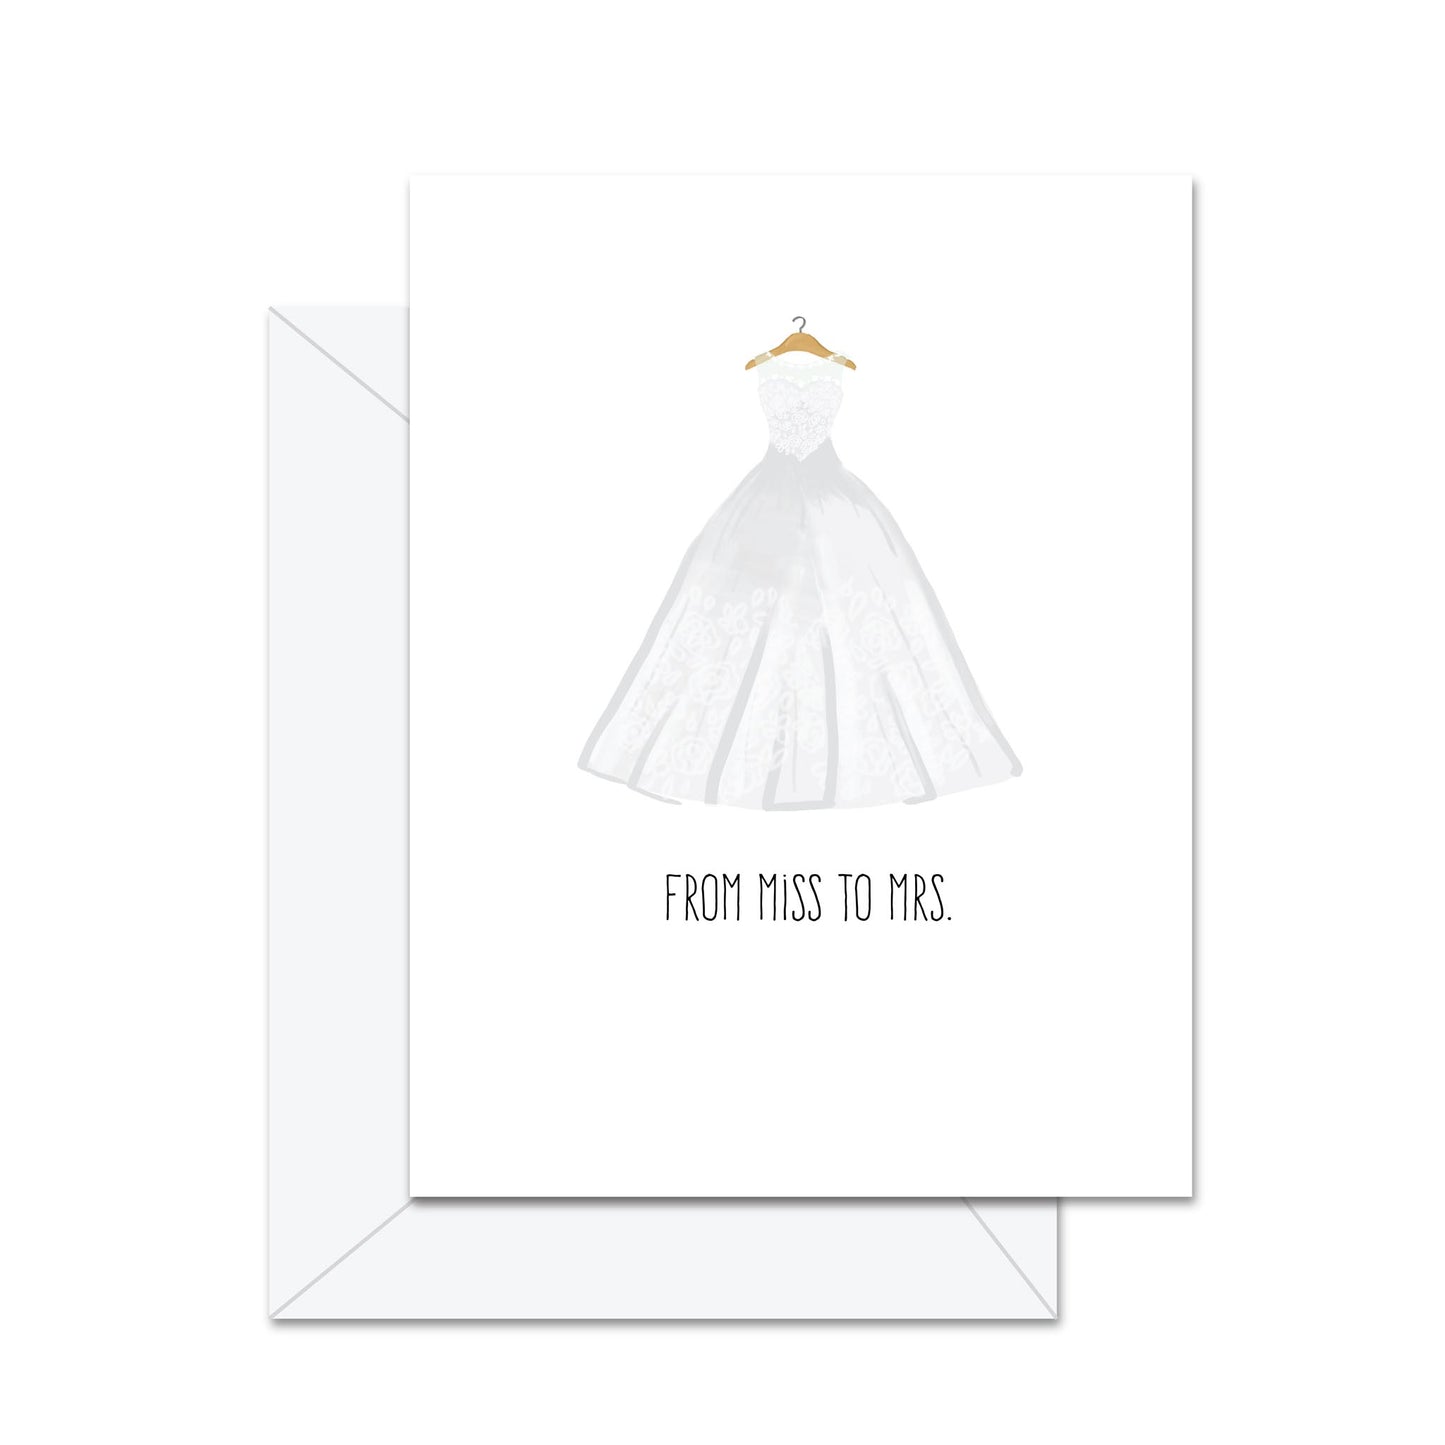 From Miss To Mrs. - Greeting Card